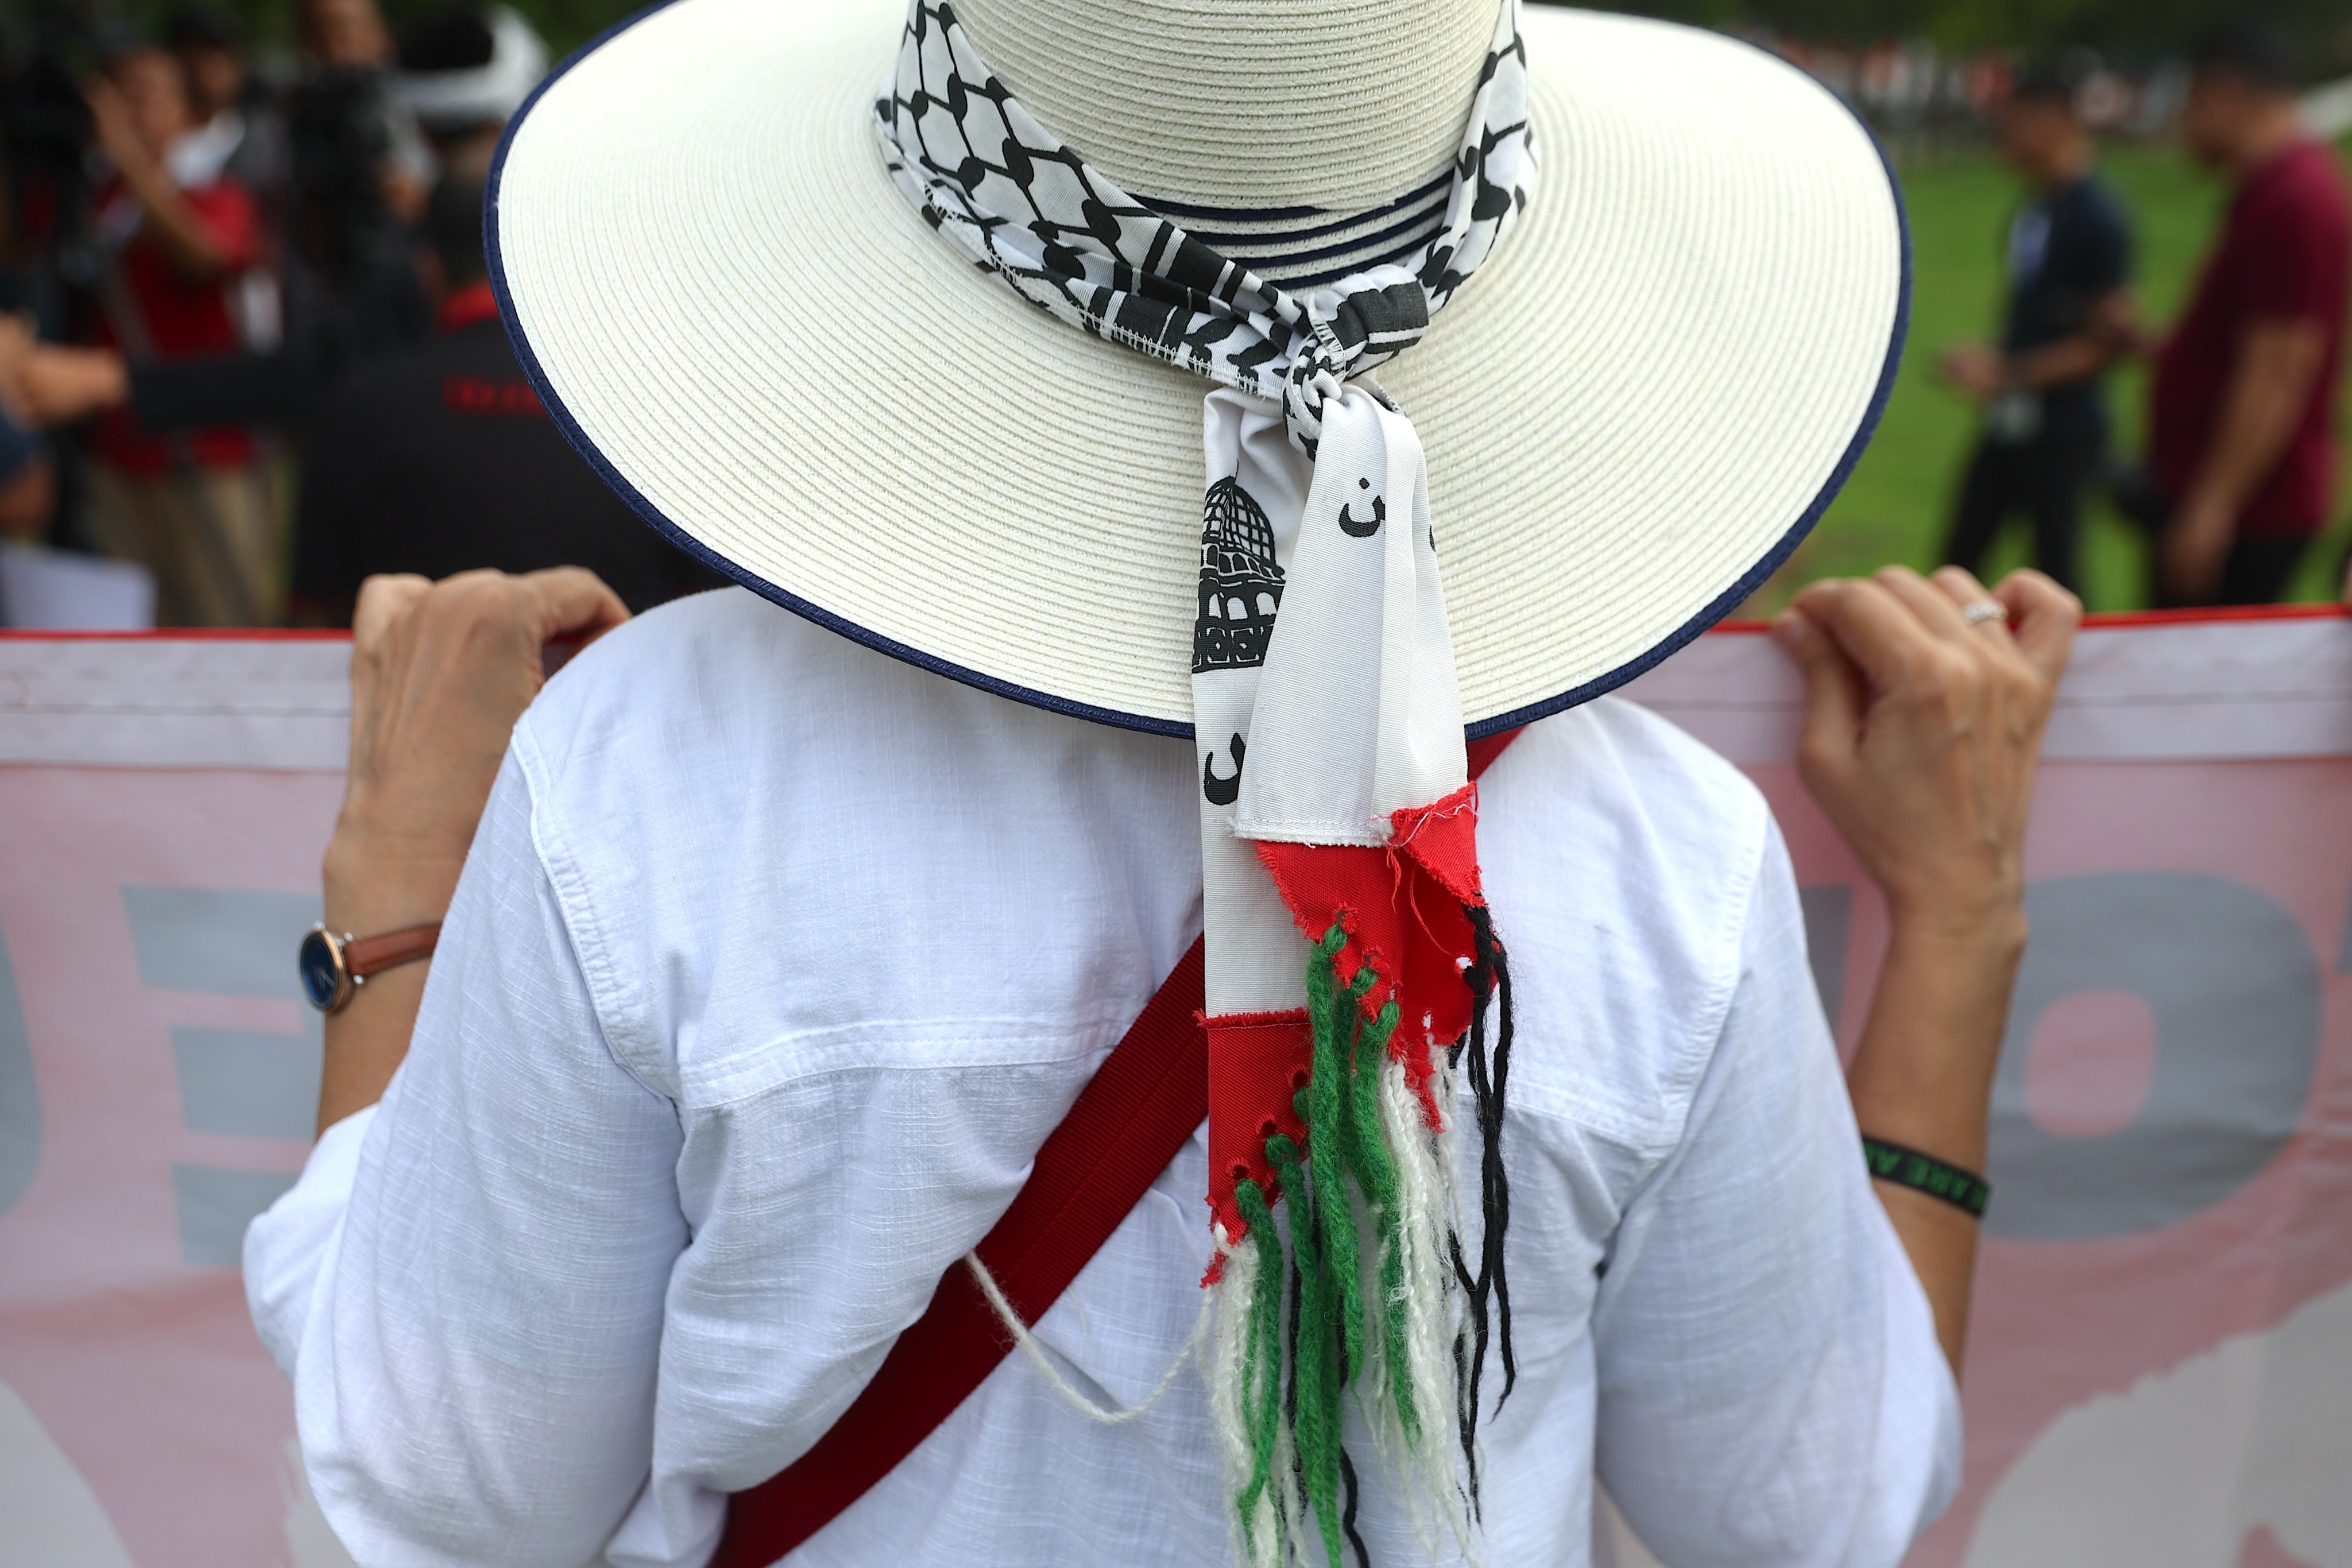 A woman wearing a hat with a Palestinian scarf attends a protest against arms manufacturers supplying weapons to Israel, outside the venue of a defence services expo in Kuala Lumpur on May 7. Malaysia has been one of the most vocal supporters of the Palestinian cause since the war in Gaza erupted last October. Photo: EPA-EFE